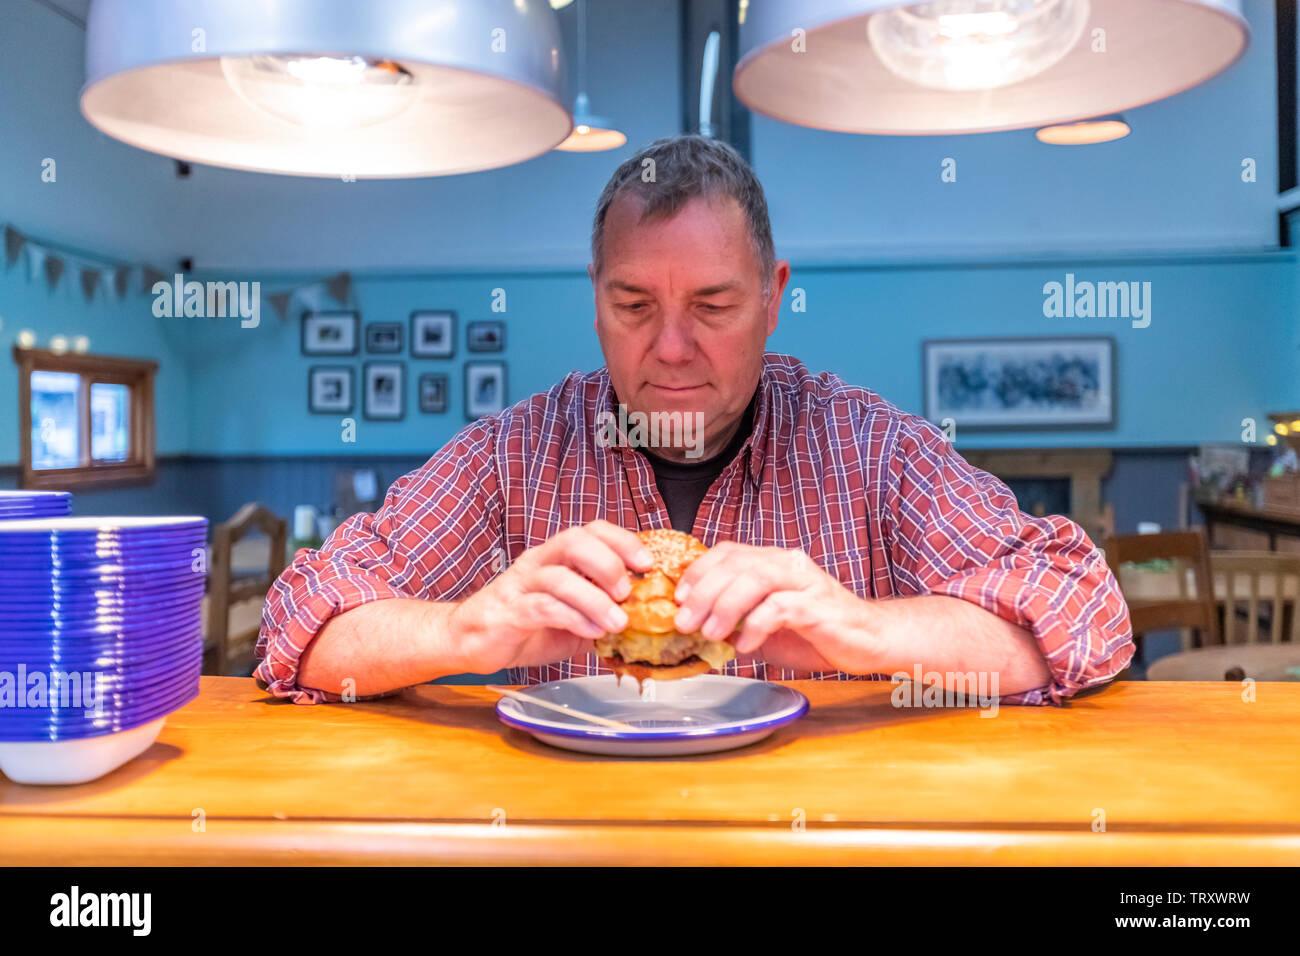 A man in a check shirt enjoys the signature burger at The Pig & Apple cafe. The cafe is based at Humble by Nature, Monmouthshire, Wales. Stock Photo